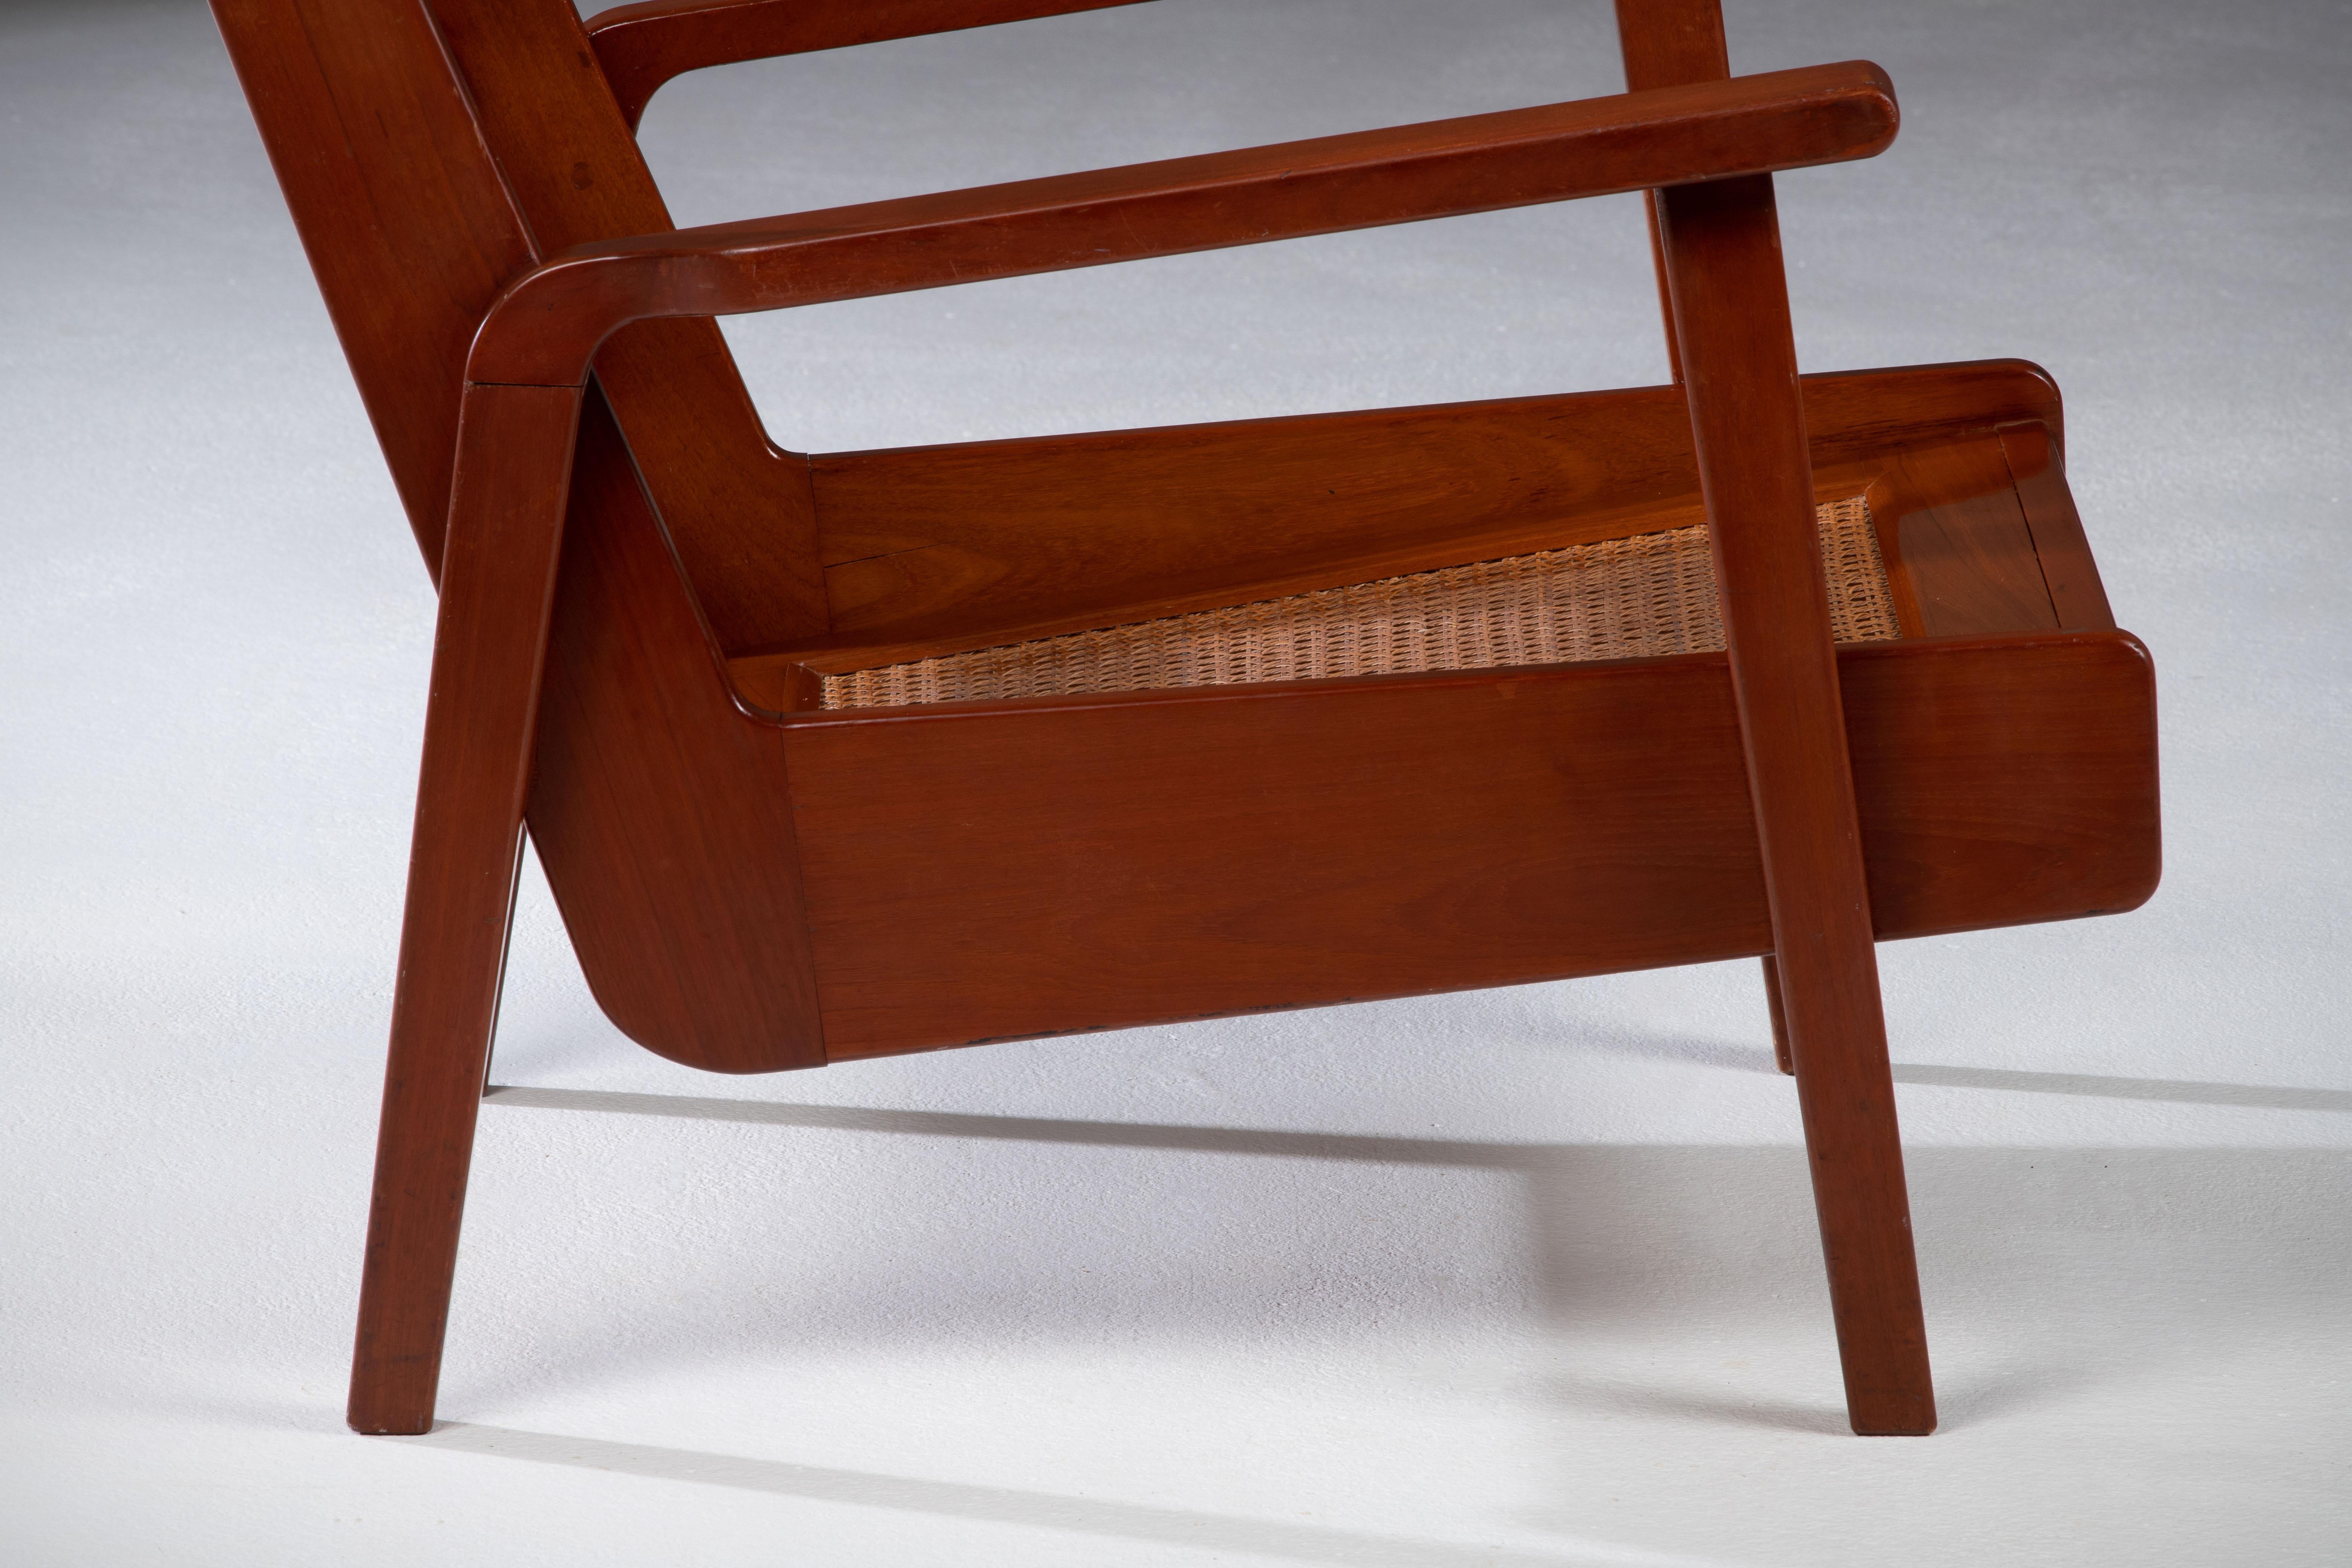 One of a kind Armchair, 1940, post-war modernist design.
Structure in solid mahogany and seat and backrest in original caning.
